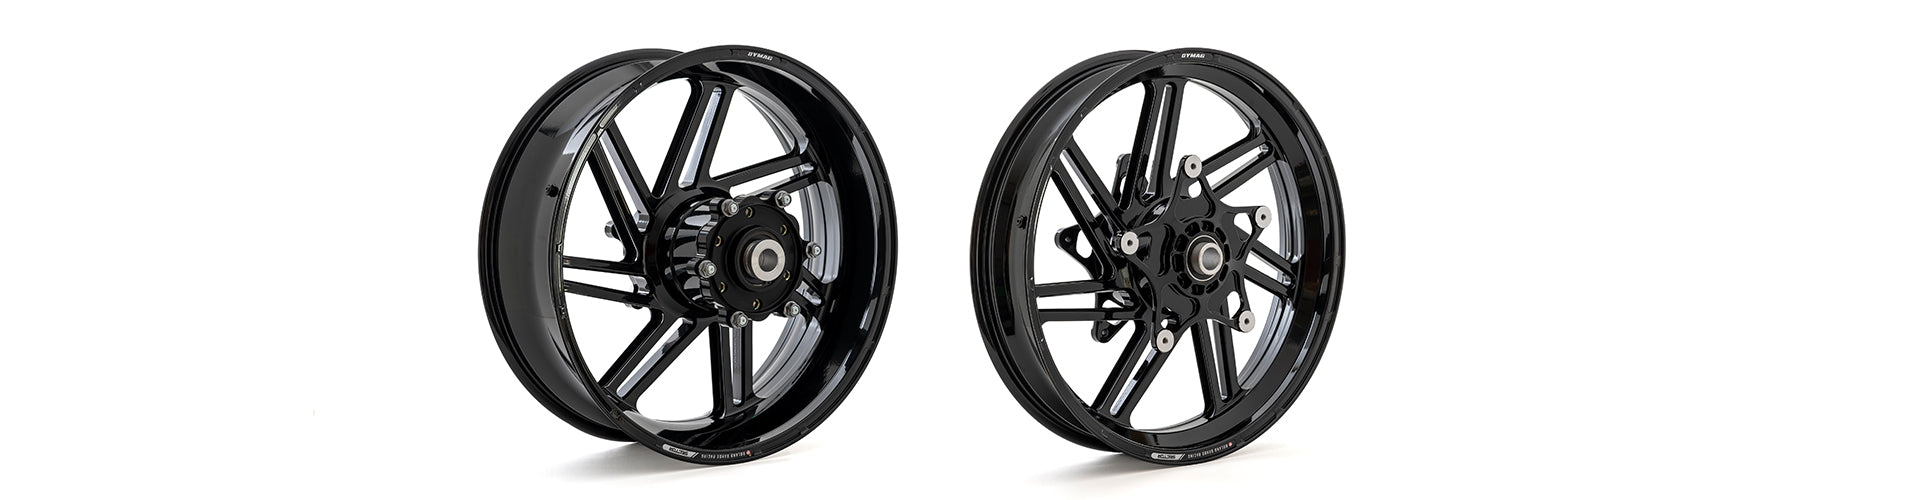 ALT Text: "Two sleek black Dymag racing wheels side by side against a white background. Both wheels feature intricate spoke designs with a shiny finish, labeled 'Dymag UP7X' and equipped with central hubs for high-performance racing applications.